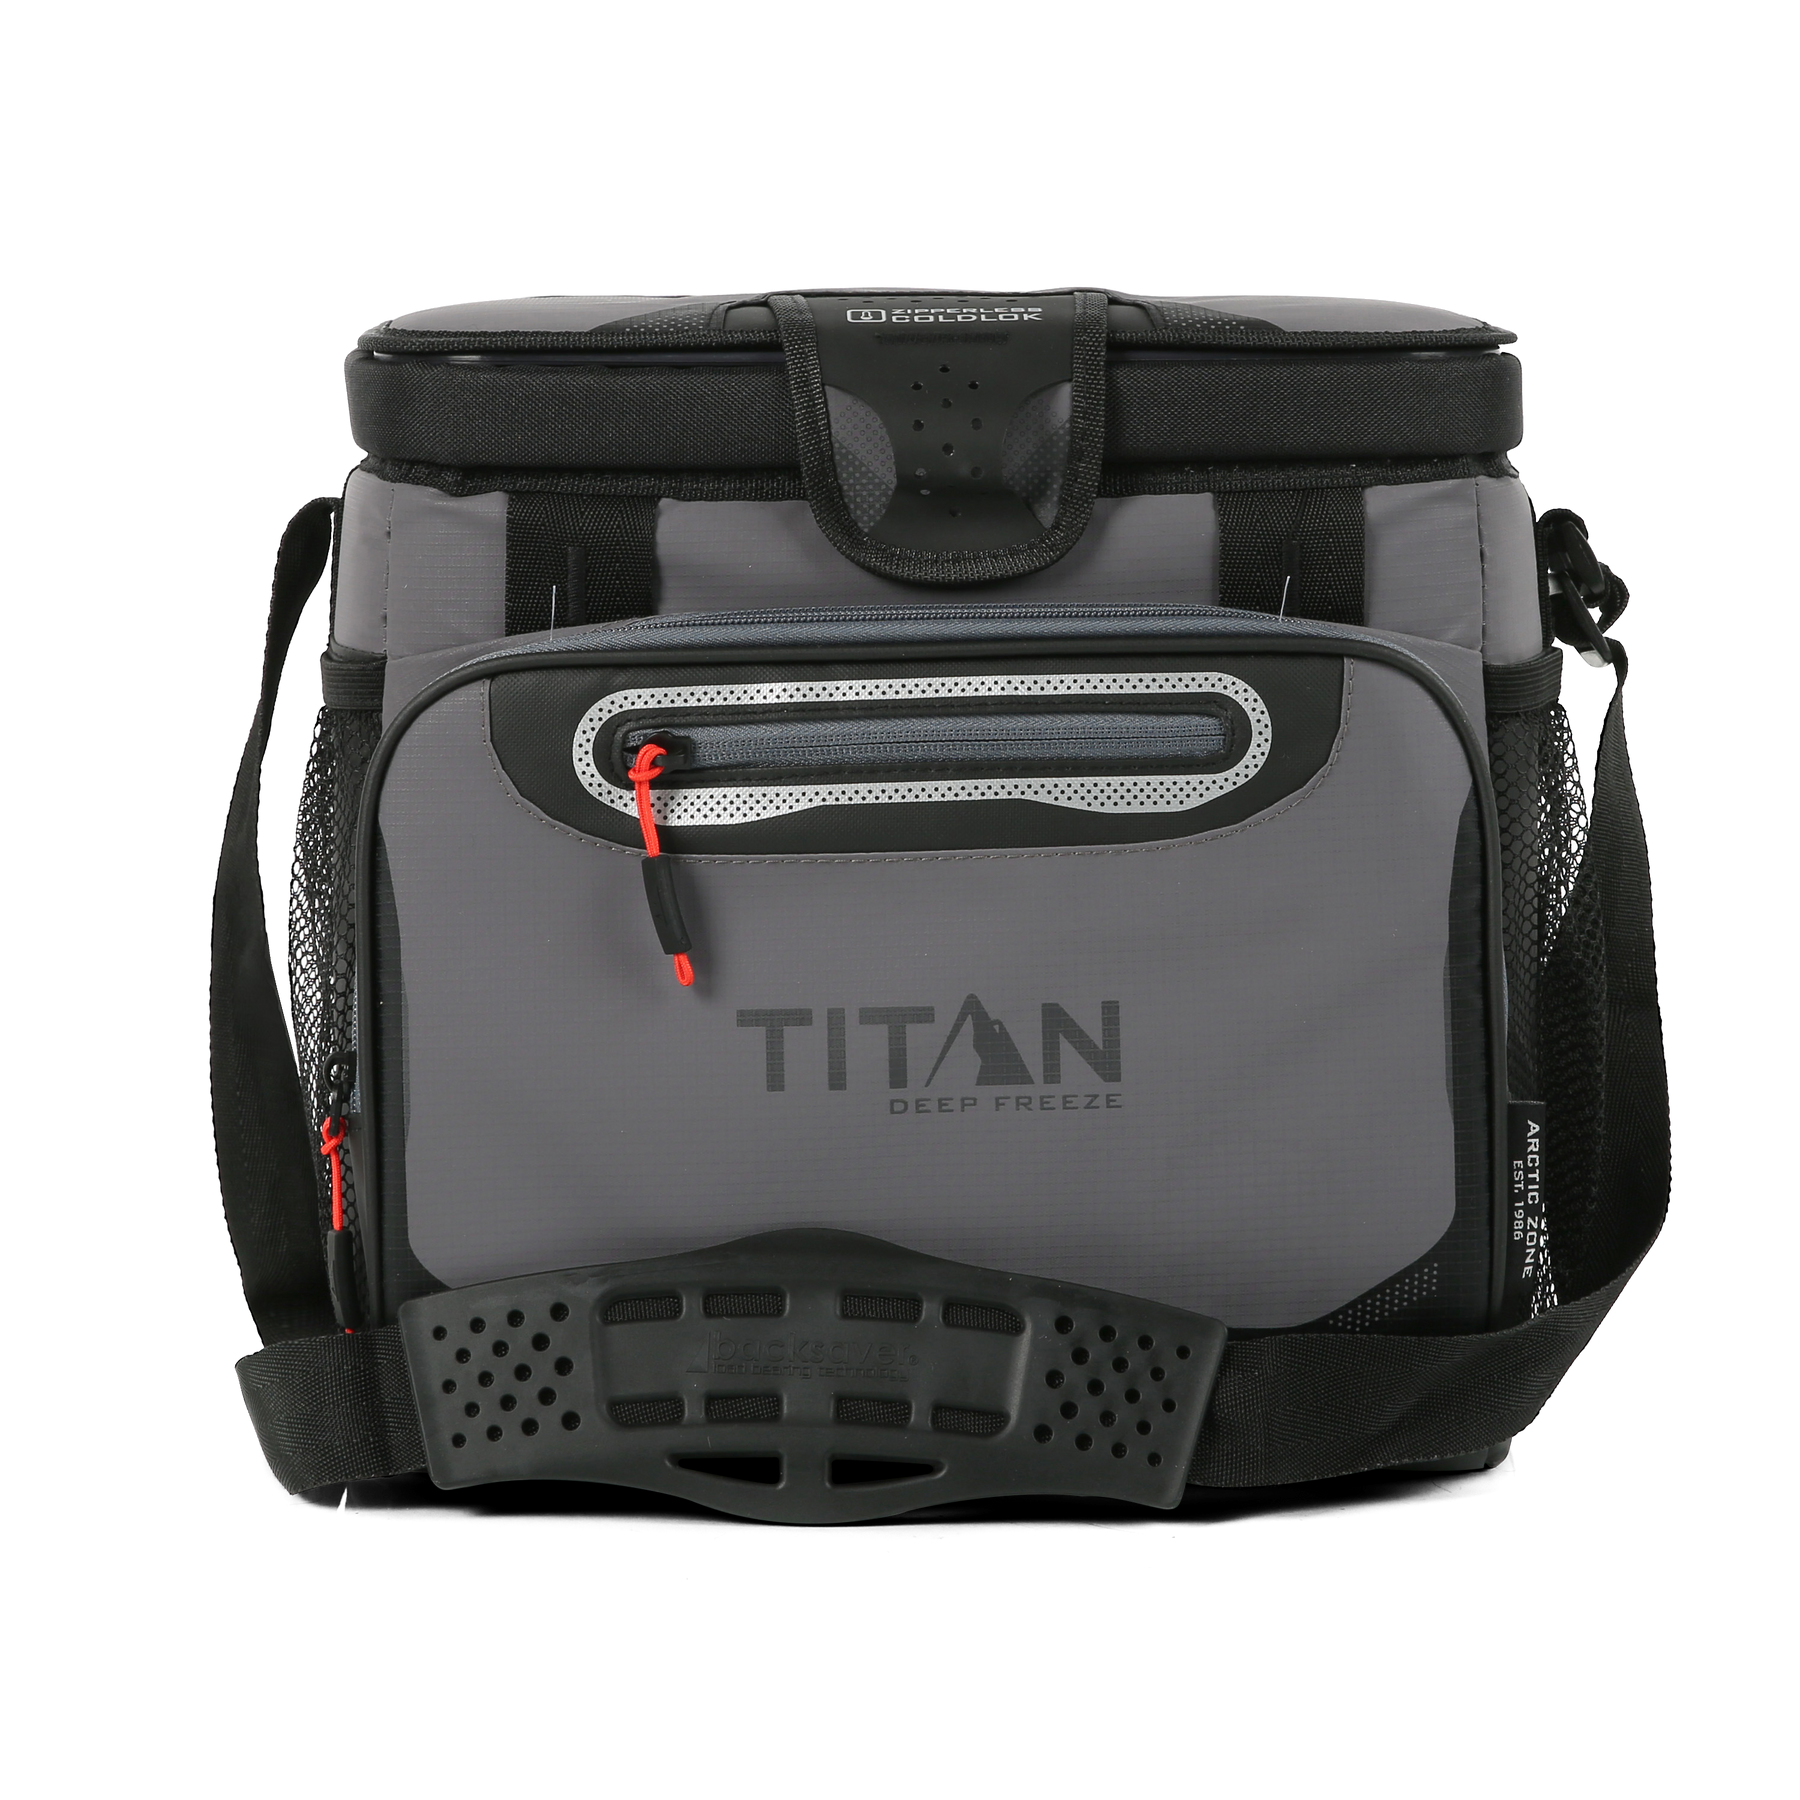 Coleman Pro 16-Can Soft Cooler